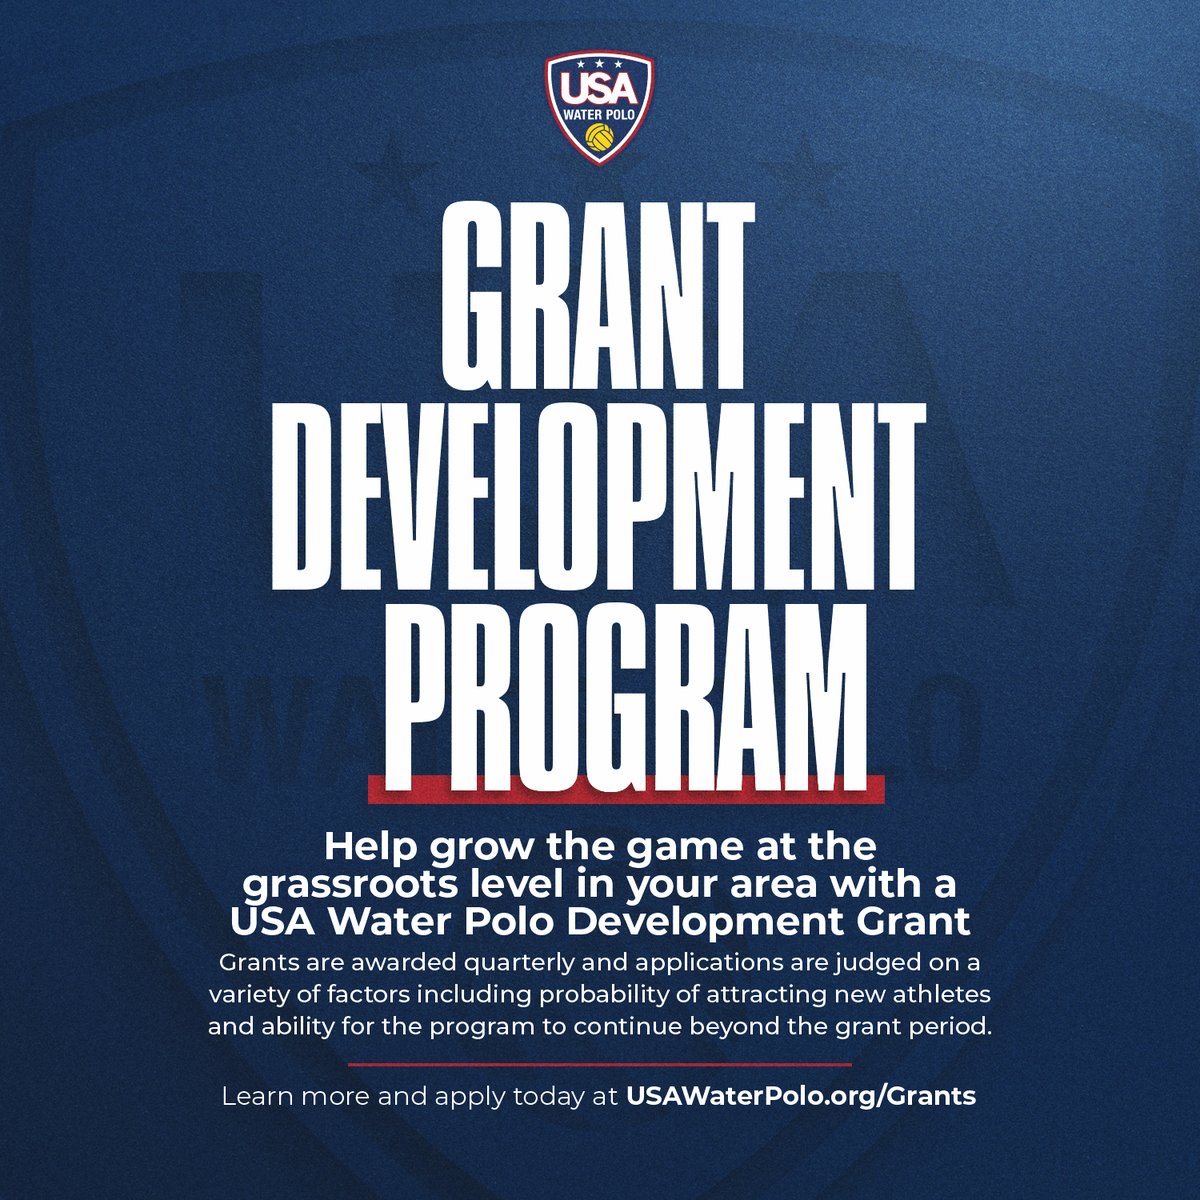 Looking to grow the sport of water polo in your community but need some extra help? Our Diversity, Equity, Inclusion and Accessibility Grant Program seeks to further the growth of water polo by providing financial support for programming. Learn more! usawaterpolo.org/grants